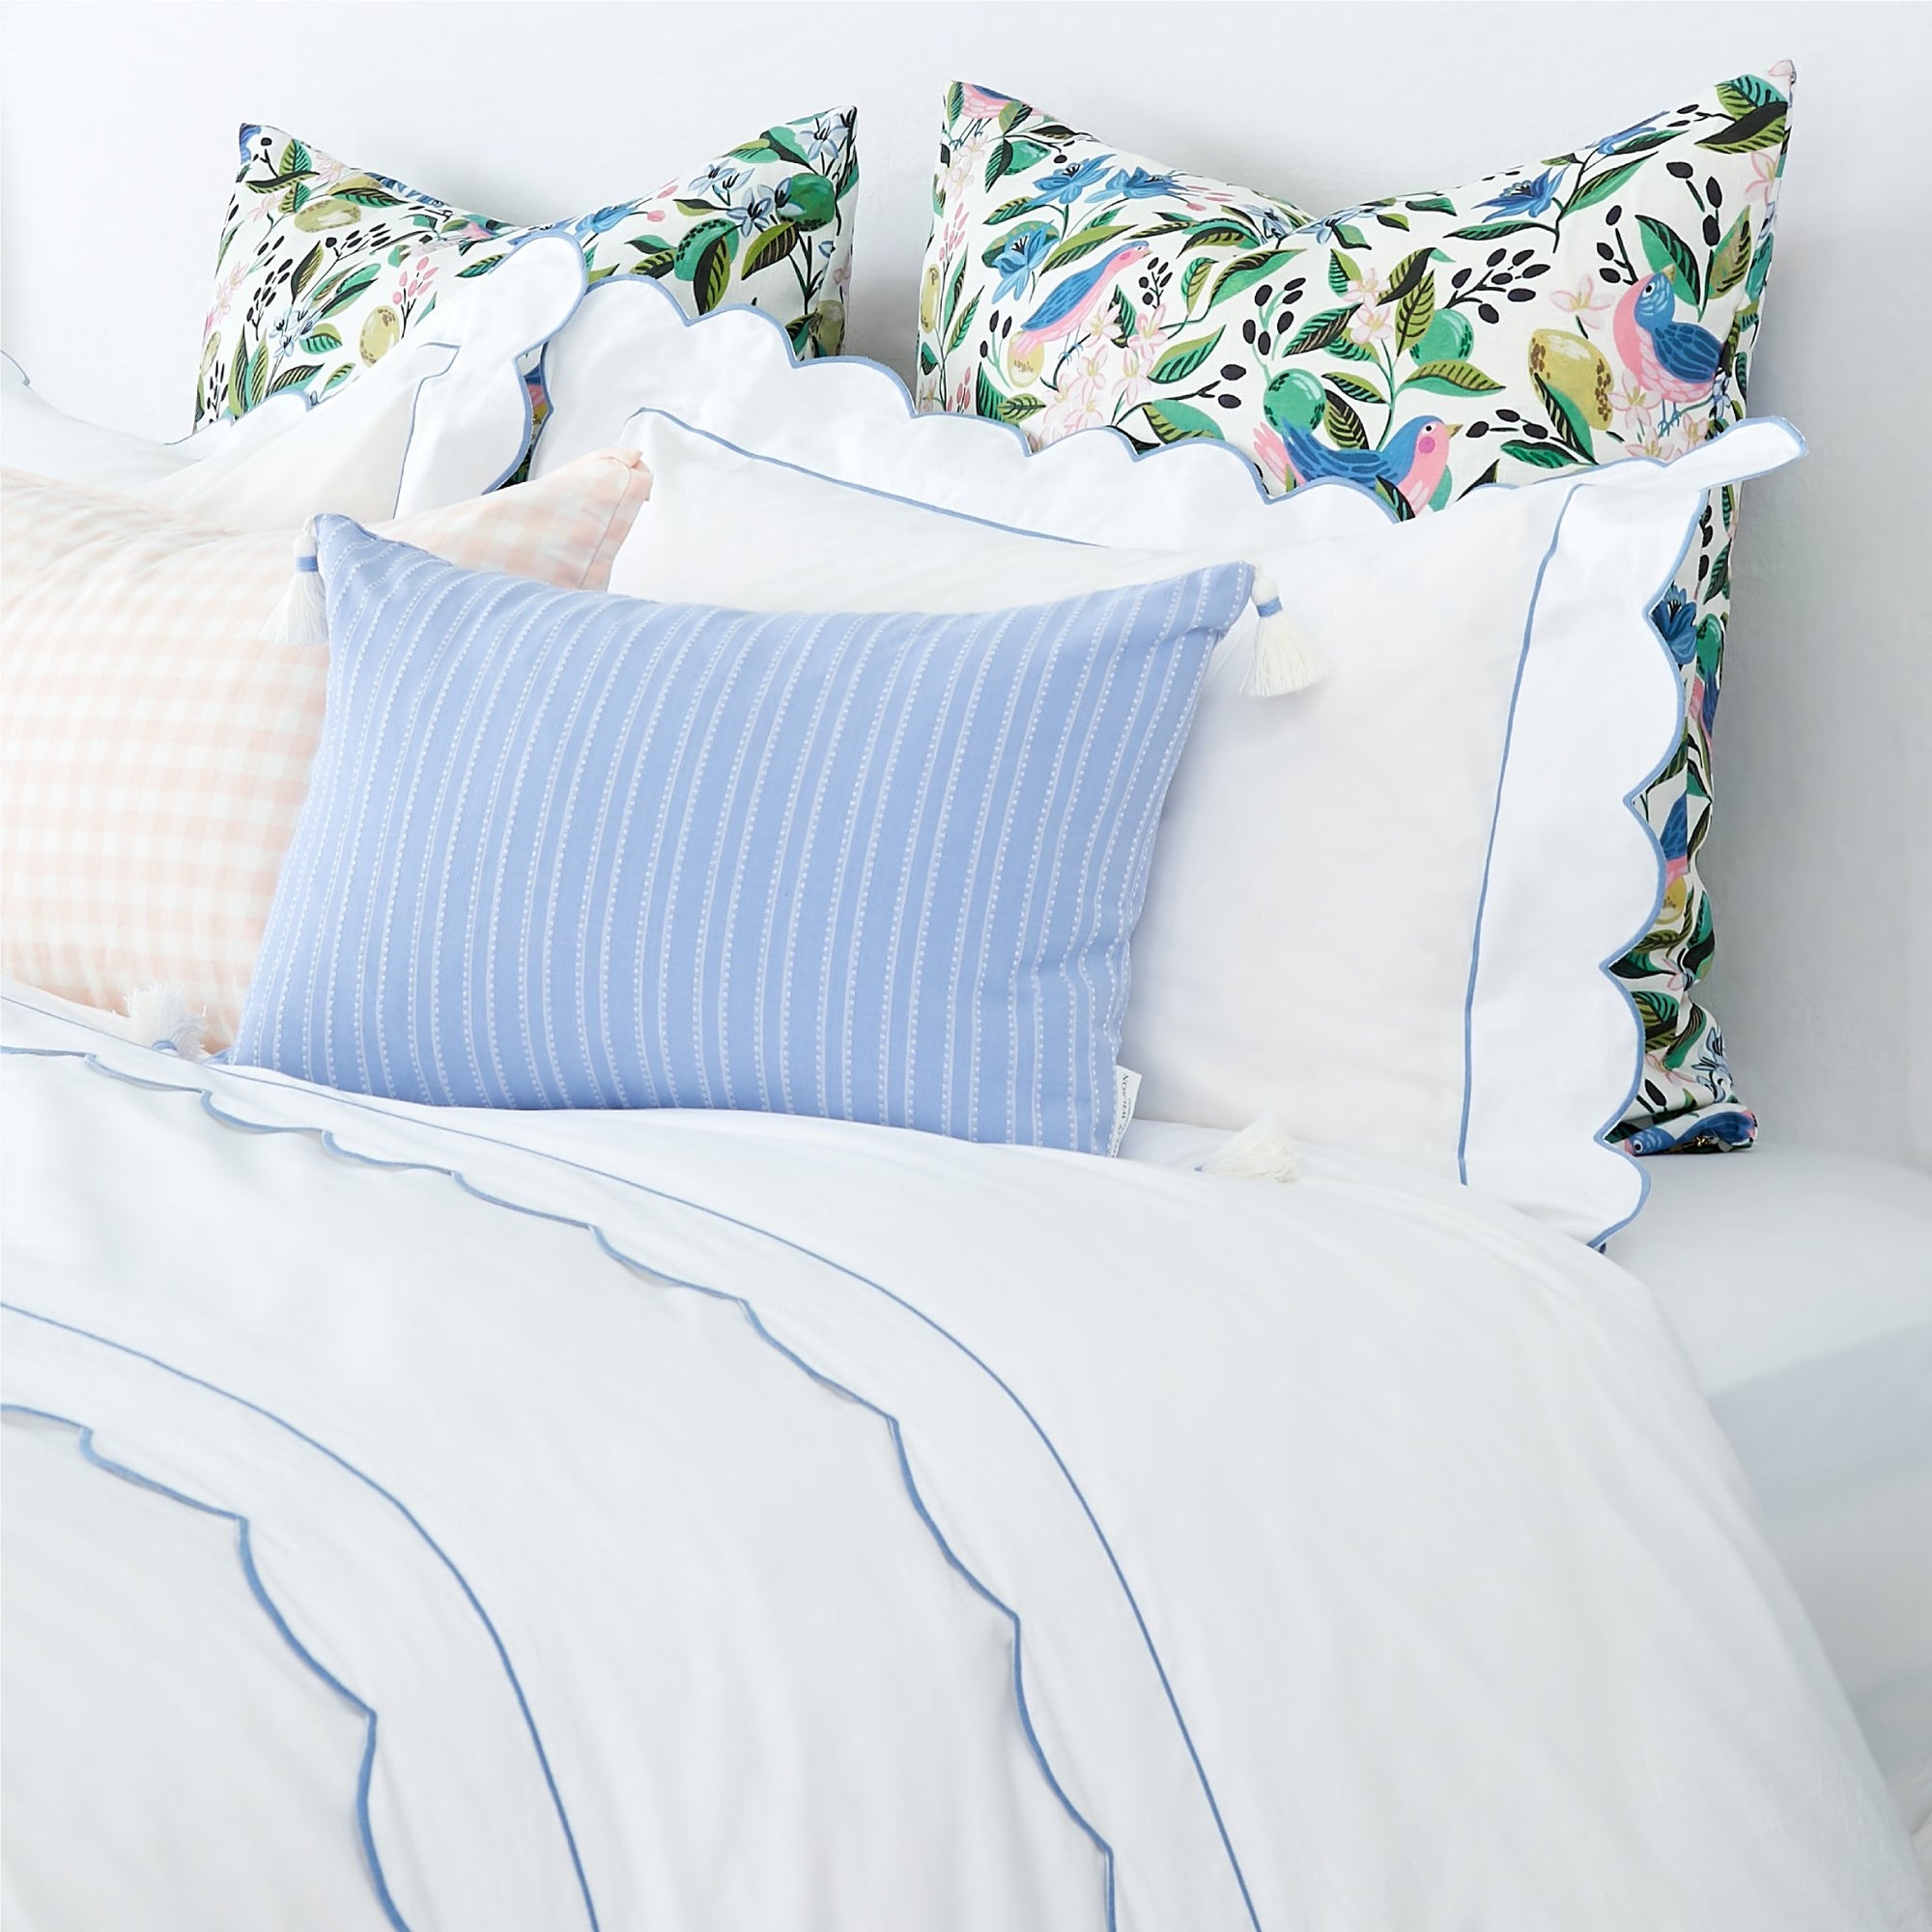 Blue Scallop Edge Matouk Butterfield Bedding on Bed